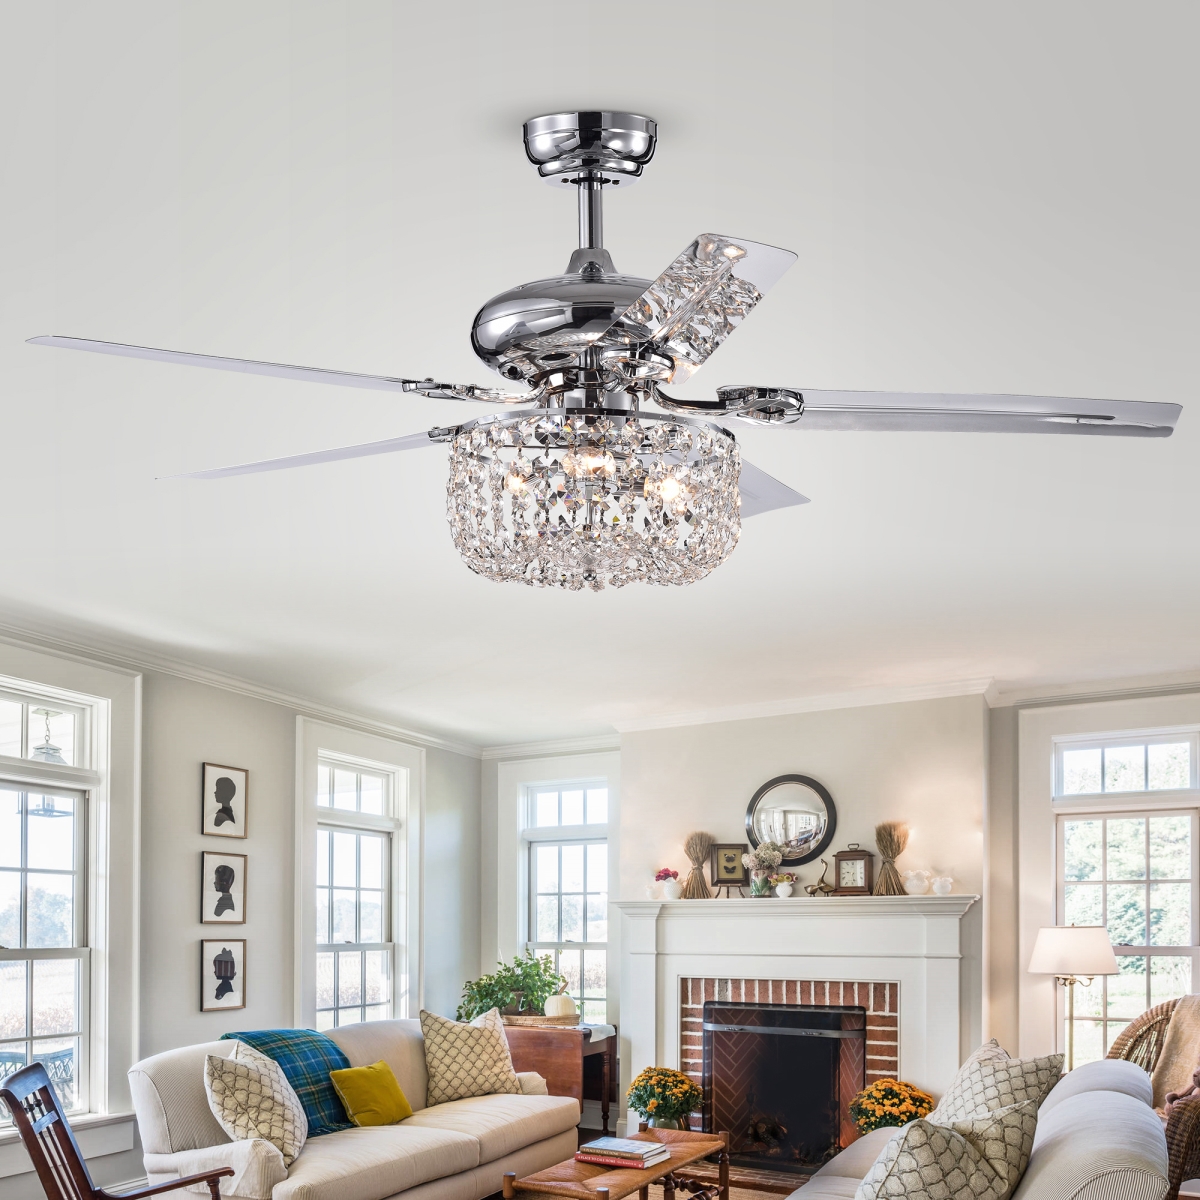 Cfl-8110remo-cha 49 In. Pocra Lighted Ceiling Fan With Crystal Basket Shade, Chrome